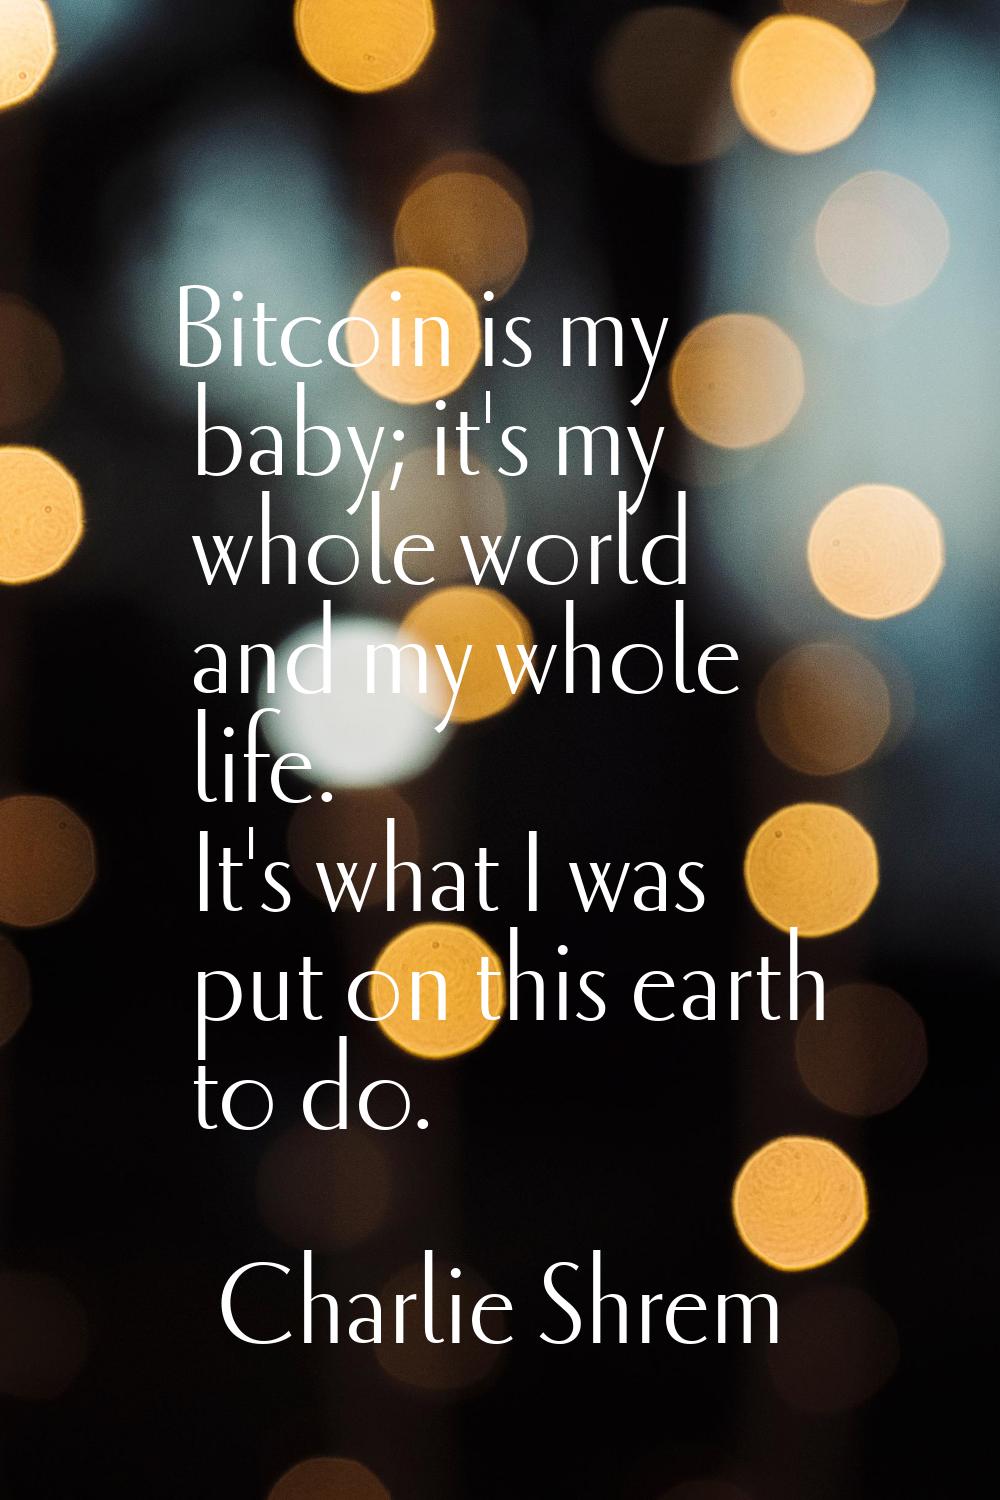 Bitcoin is my baby; it's my whole world and my whole life. It's what I was put on this earth to do.